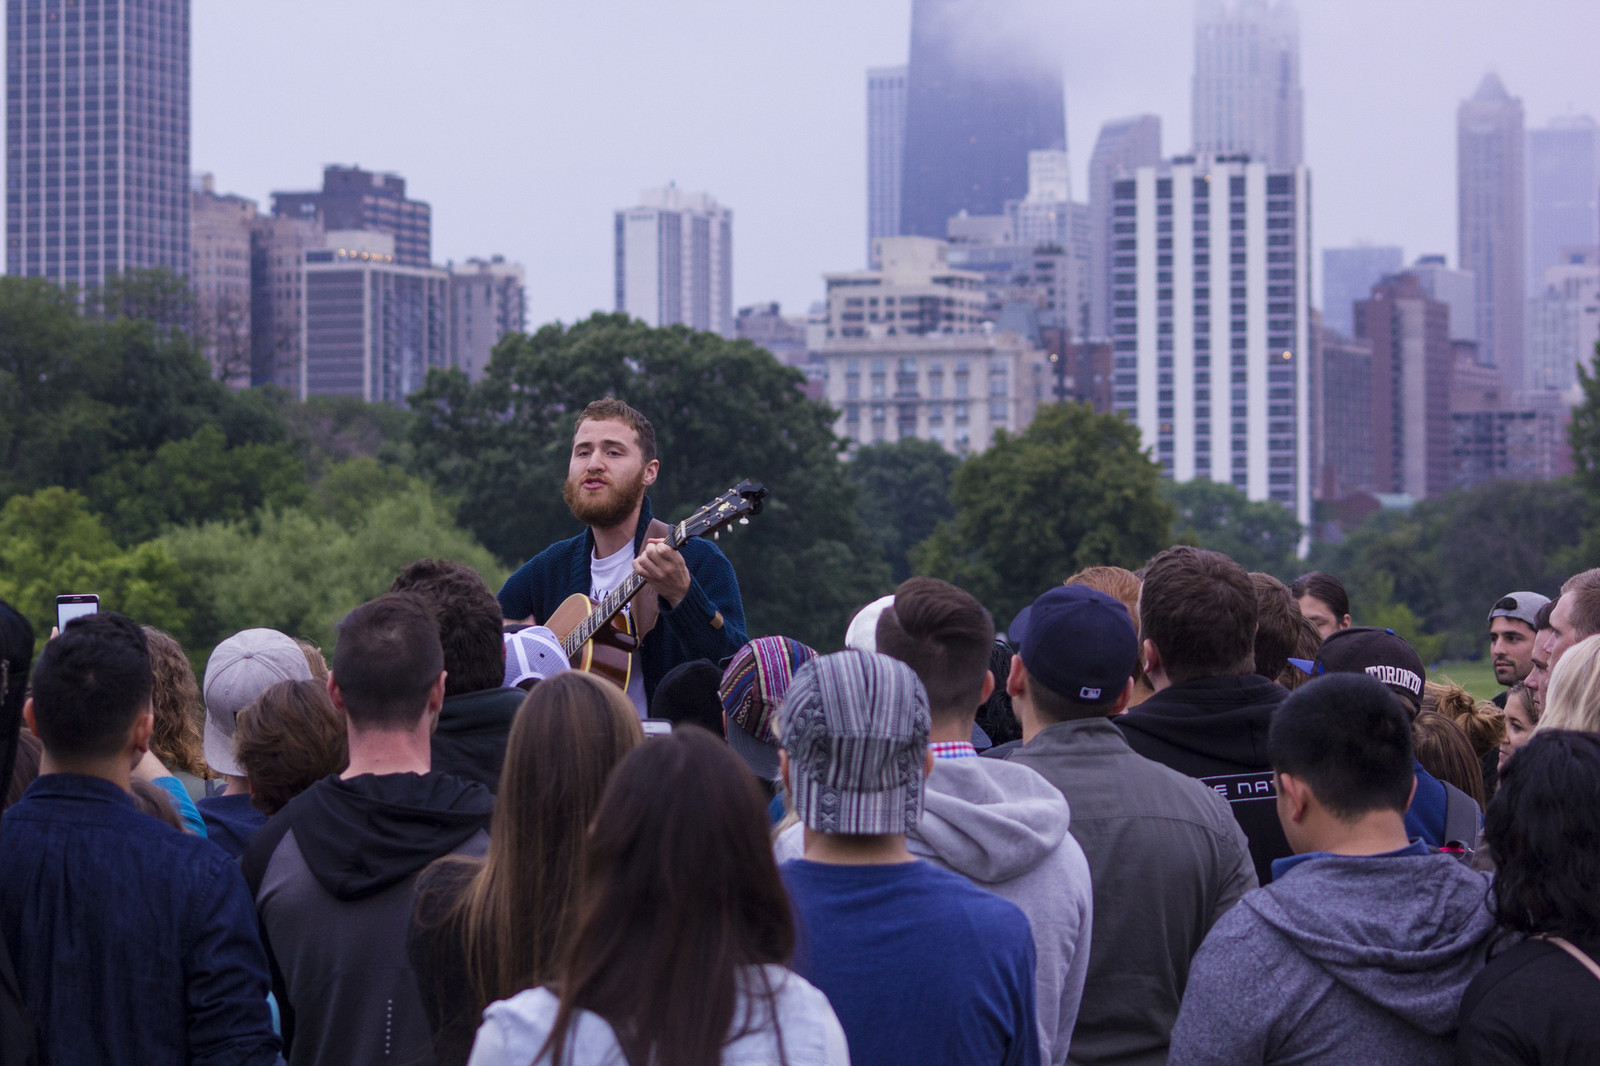 Mike Posner performing at Lincoln Park in Chicago, IL July 8, 2015
Photo by Dan Garcia
TheEarlyRegistration.com
